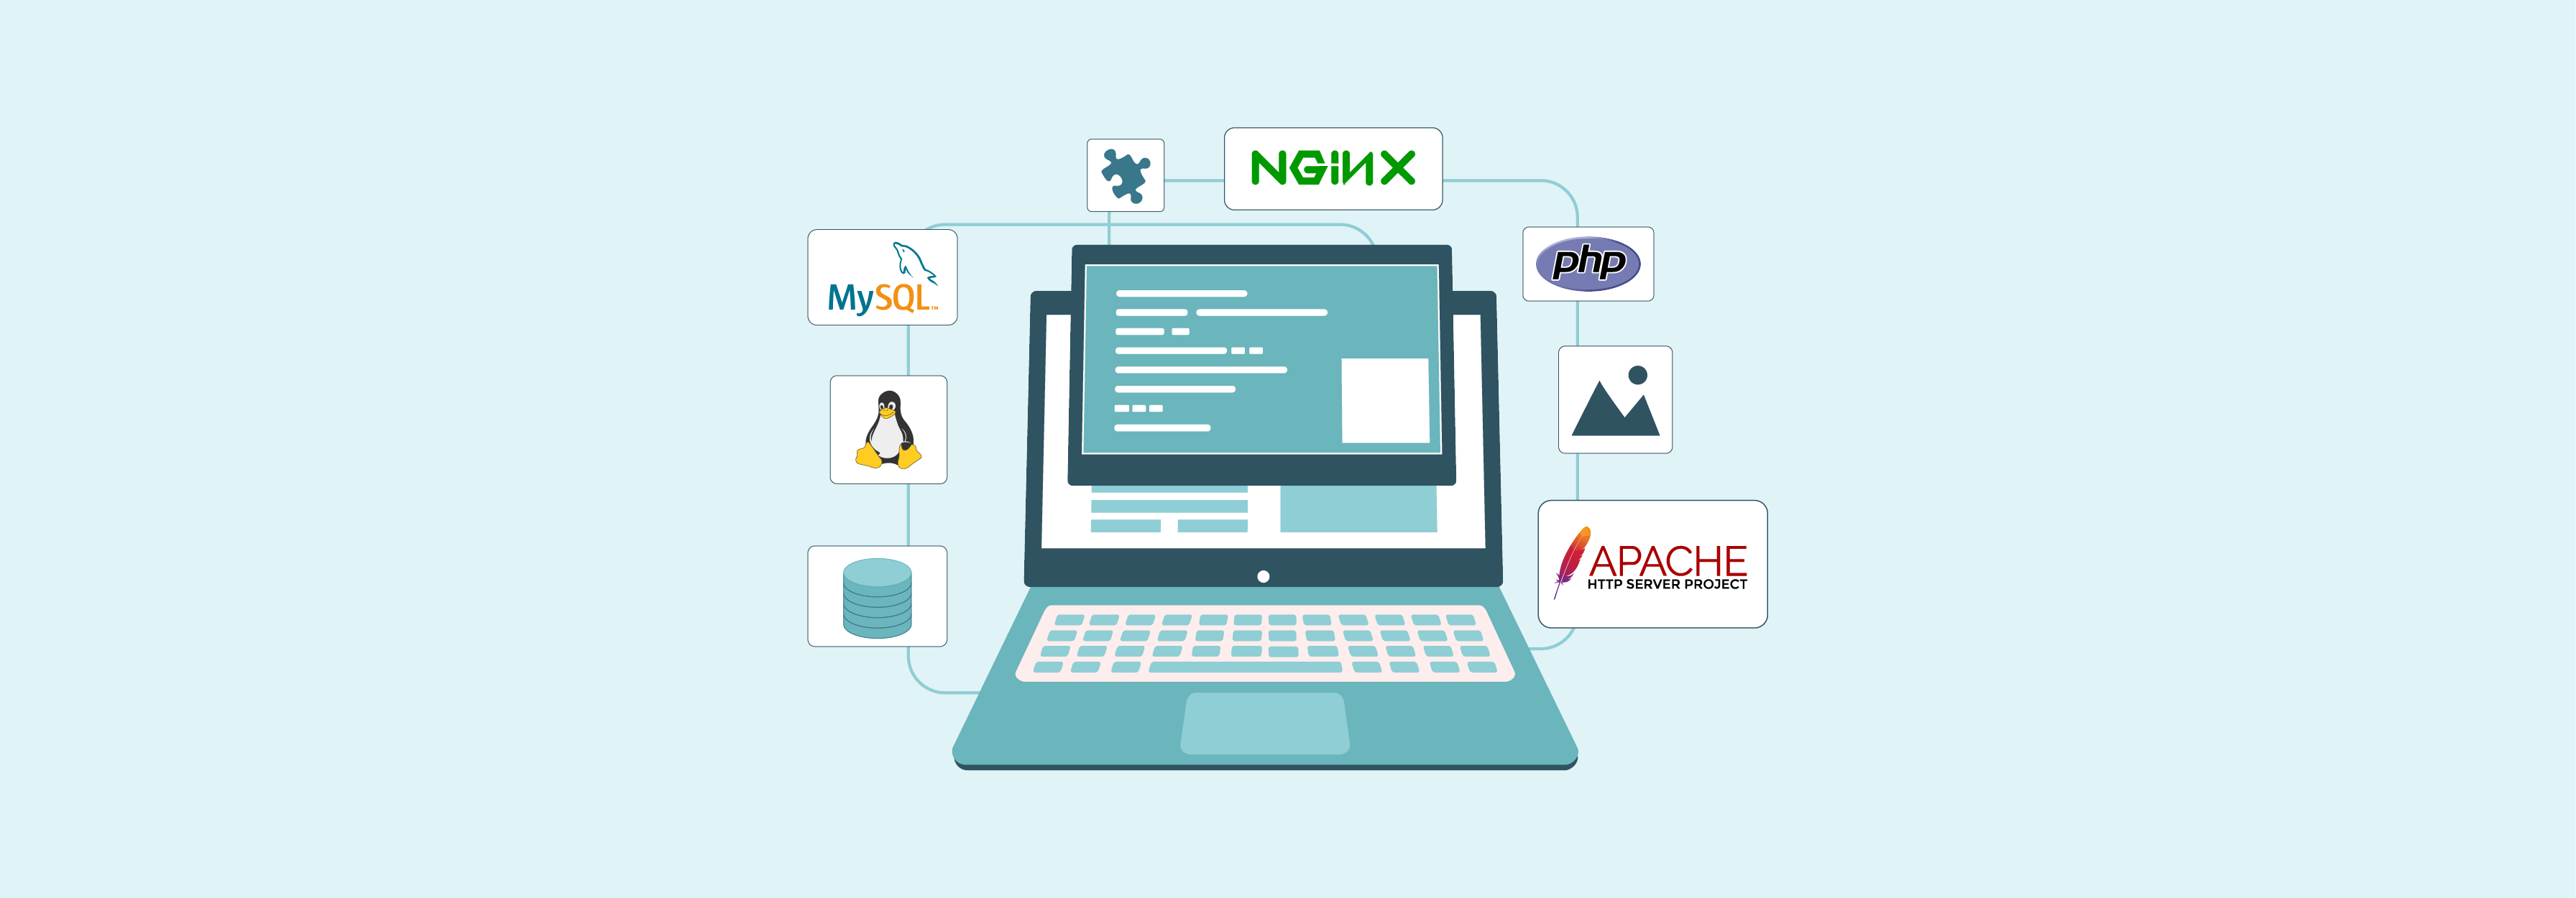 Overview of software requirements for Magento hosting